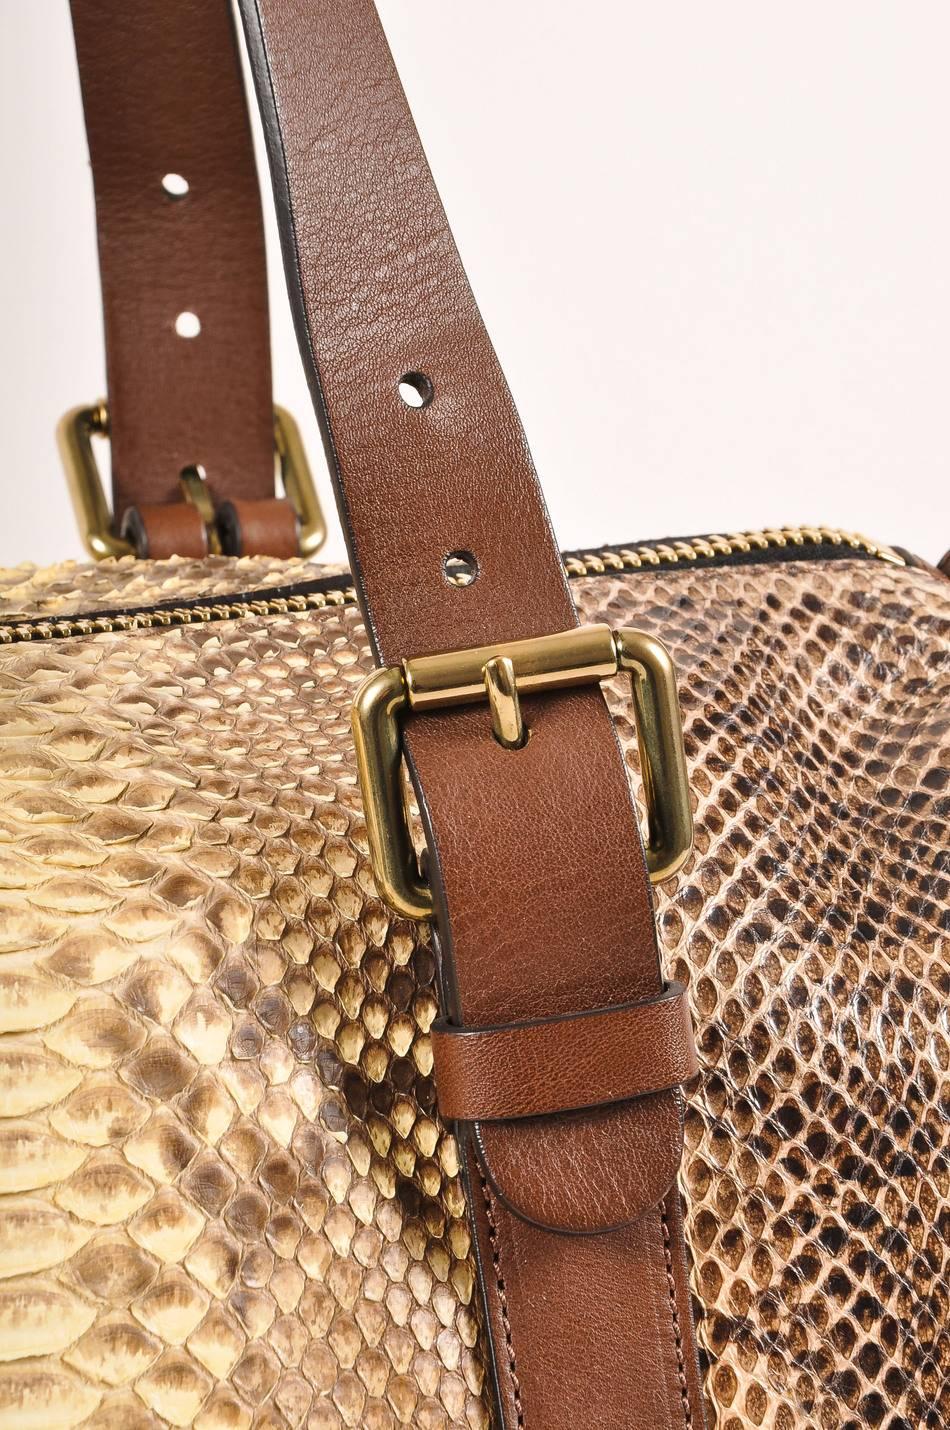 This oversized duffel bag features mixed snakeskin construction; panels of viper, ayers, and python skins. Two flat brown leather handles with gold tone buckles. Optional shoulder strap and tassel detail. Top zipper closure. Black textile lining. To